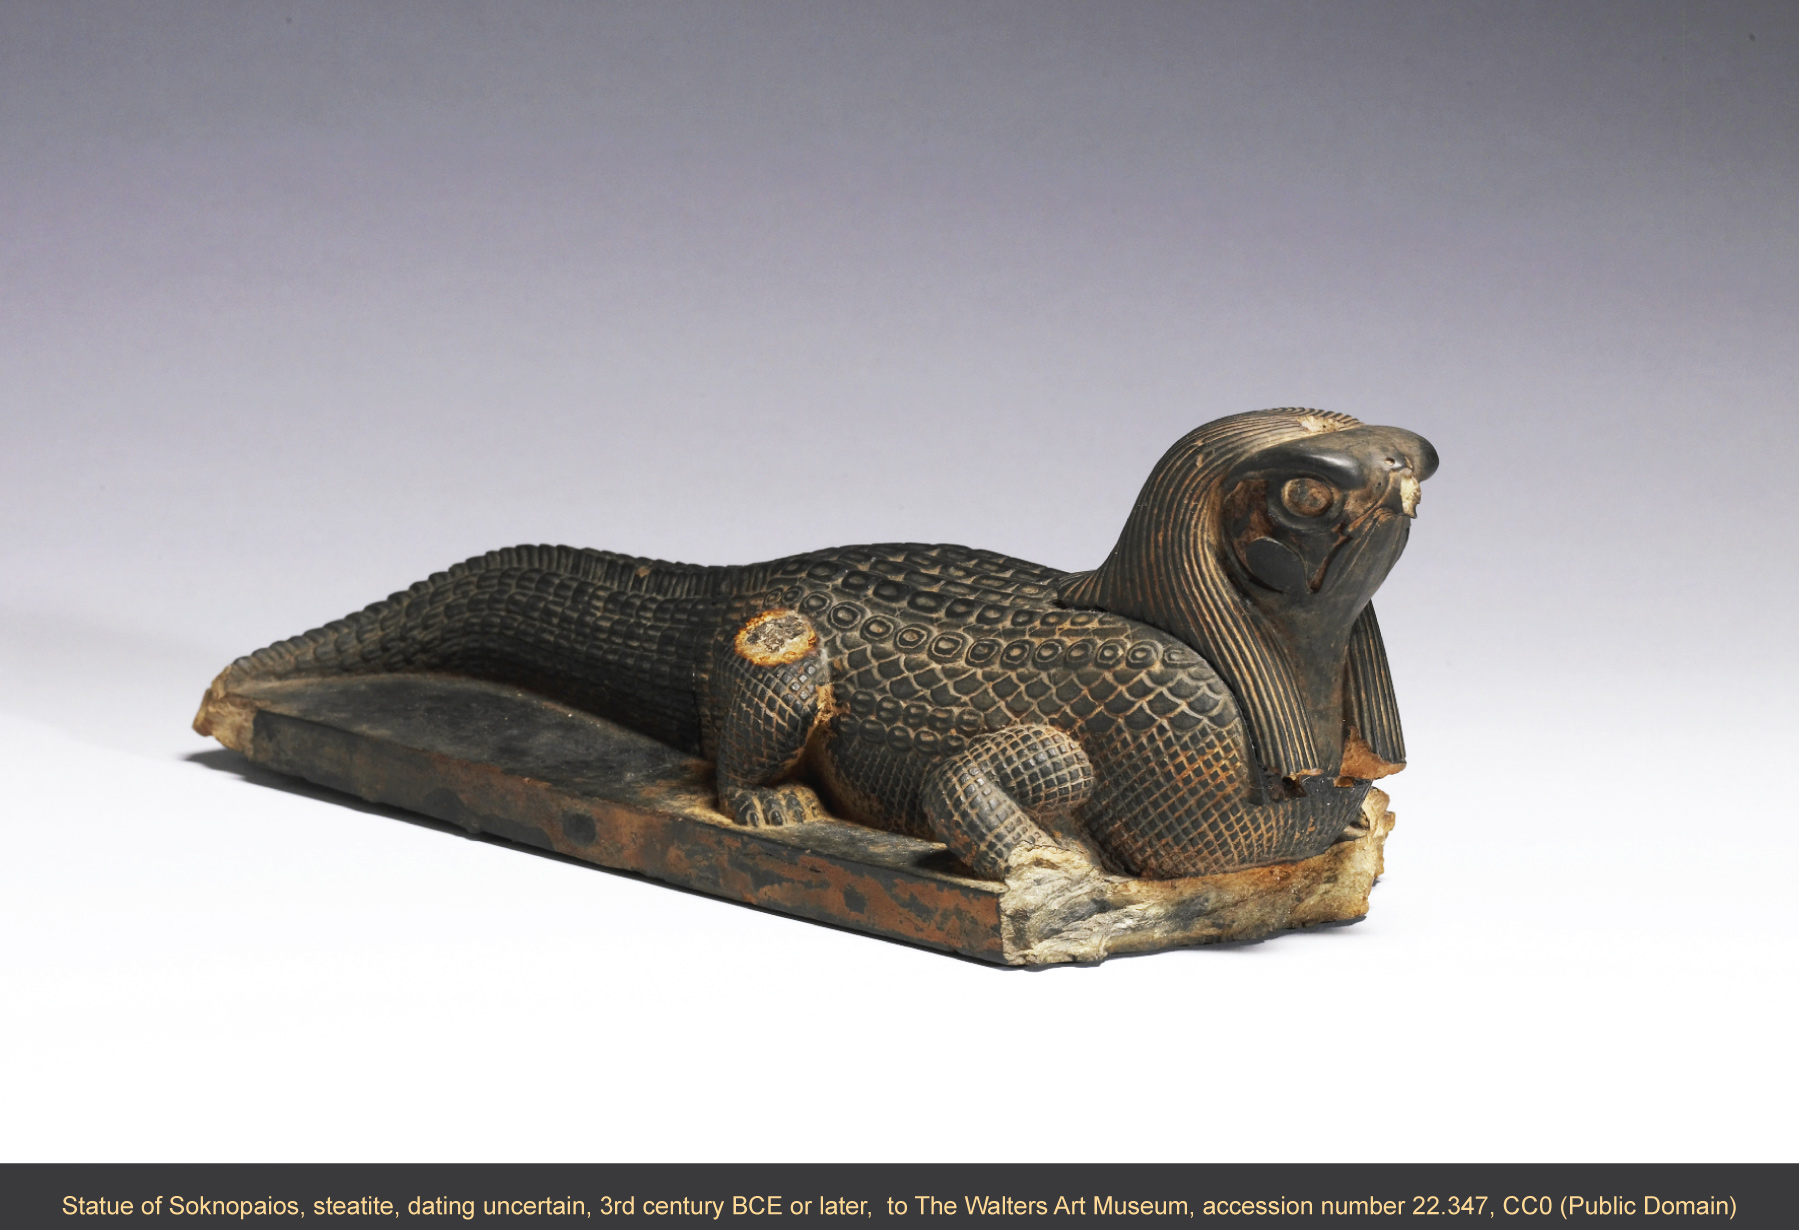 The ancient Egyptian crocodile god Soknopaios. The Walters Art Museum, accession number 22.347.